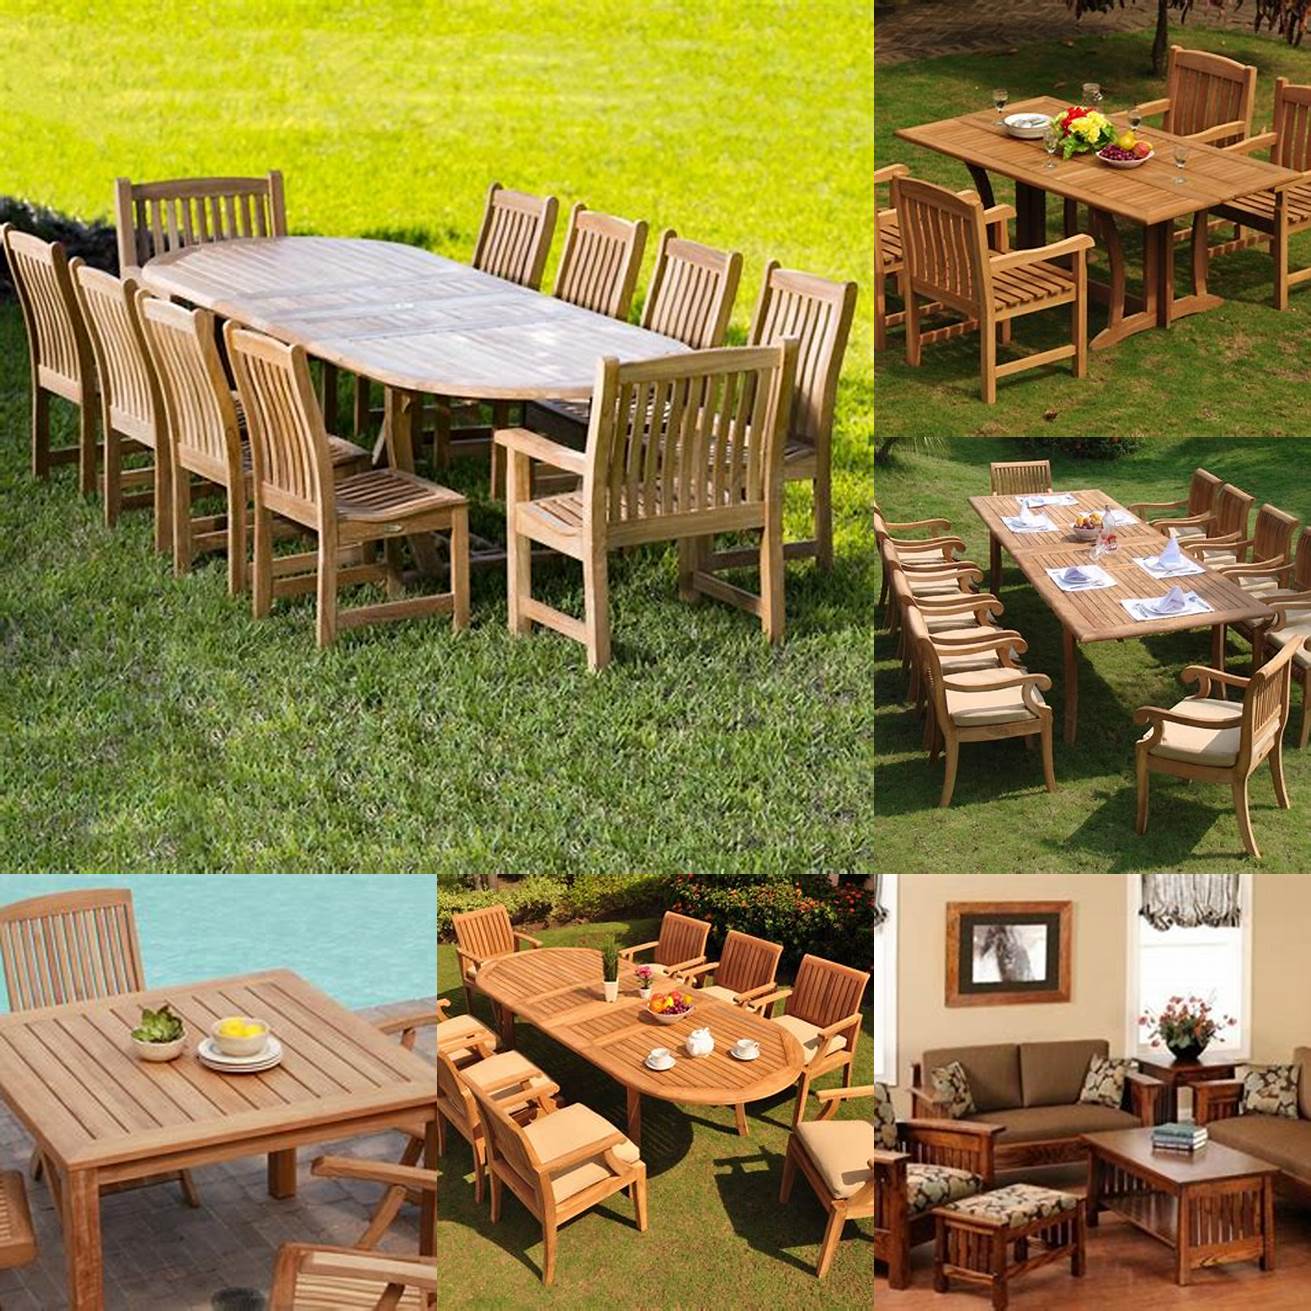 A person comparing teak furniture to other furniture